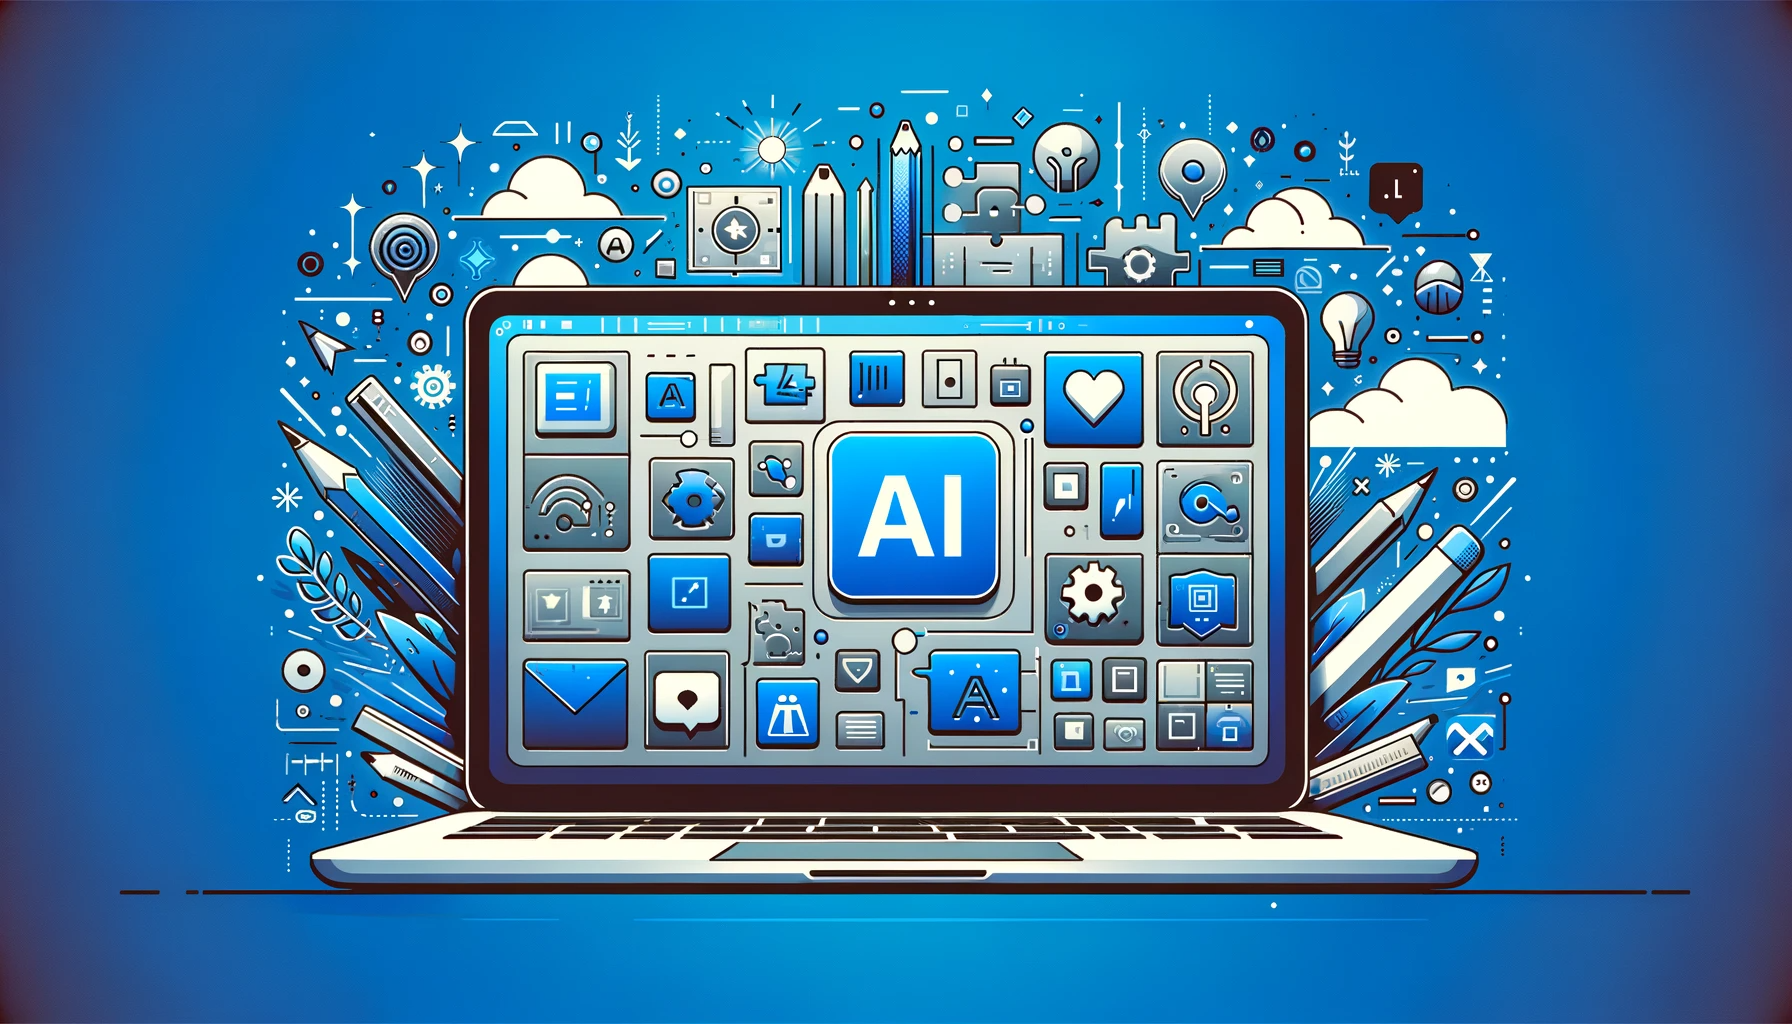 Vibrant illustration of a laptop with an 'AI' icon on the screen, surrounded by various technology and multimedia symbols, representing the expansive influence of artificial intelligence in the digital world.